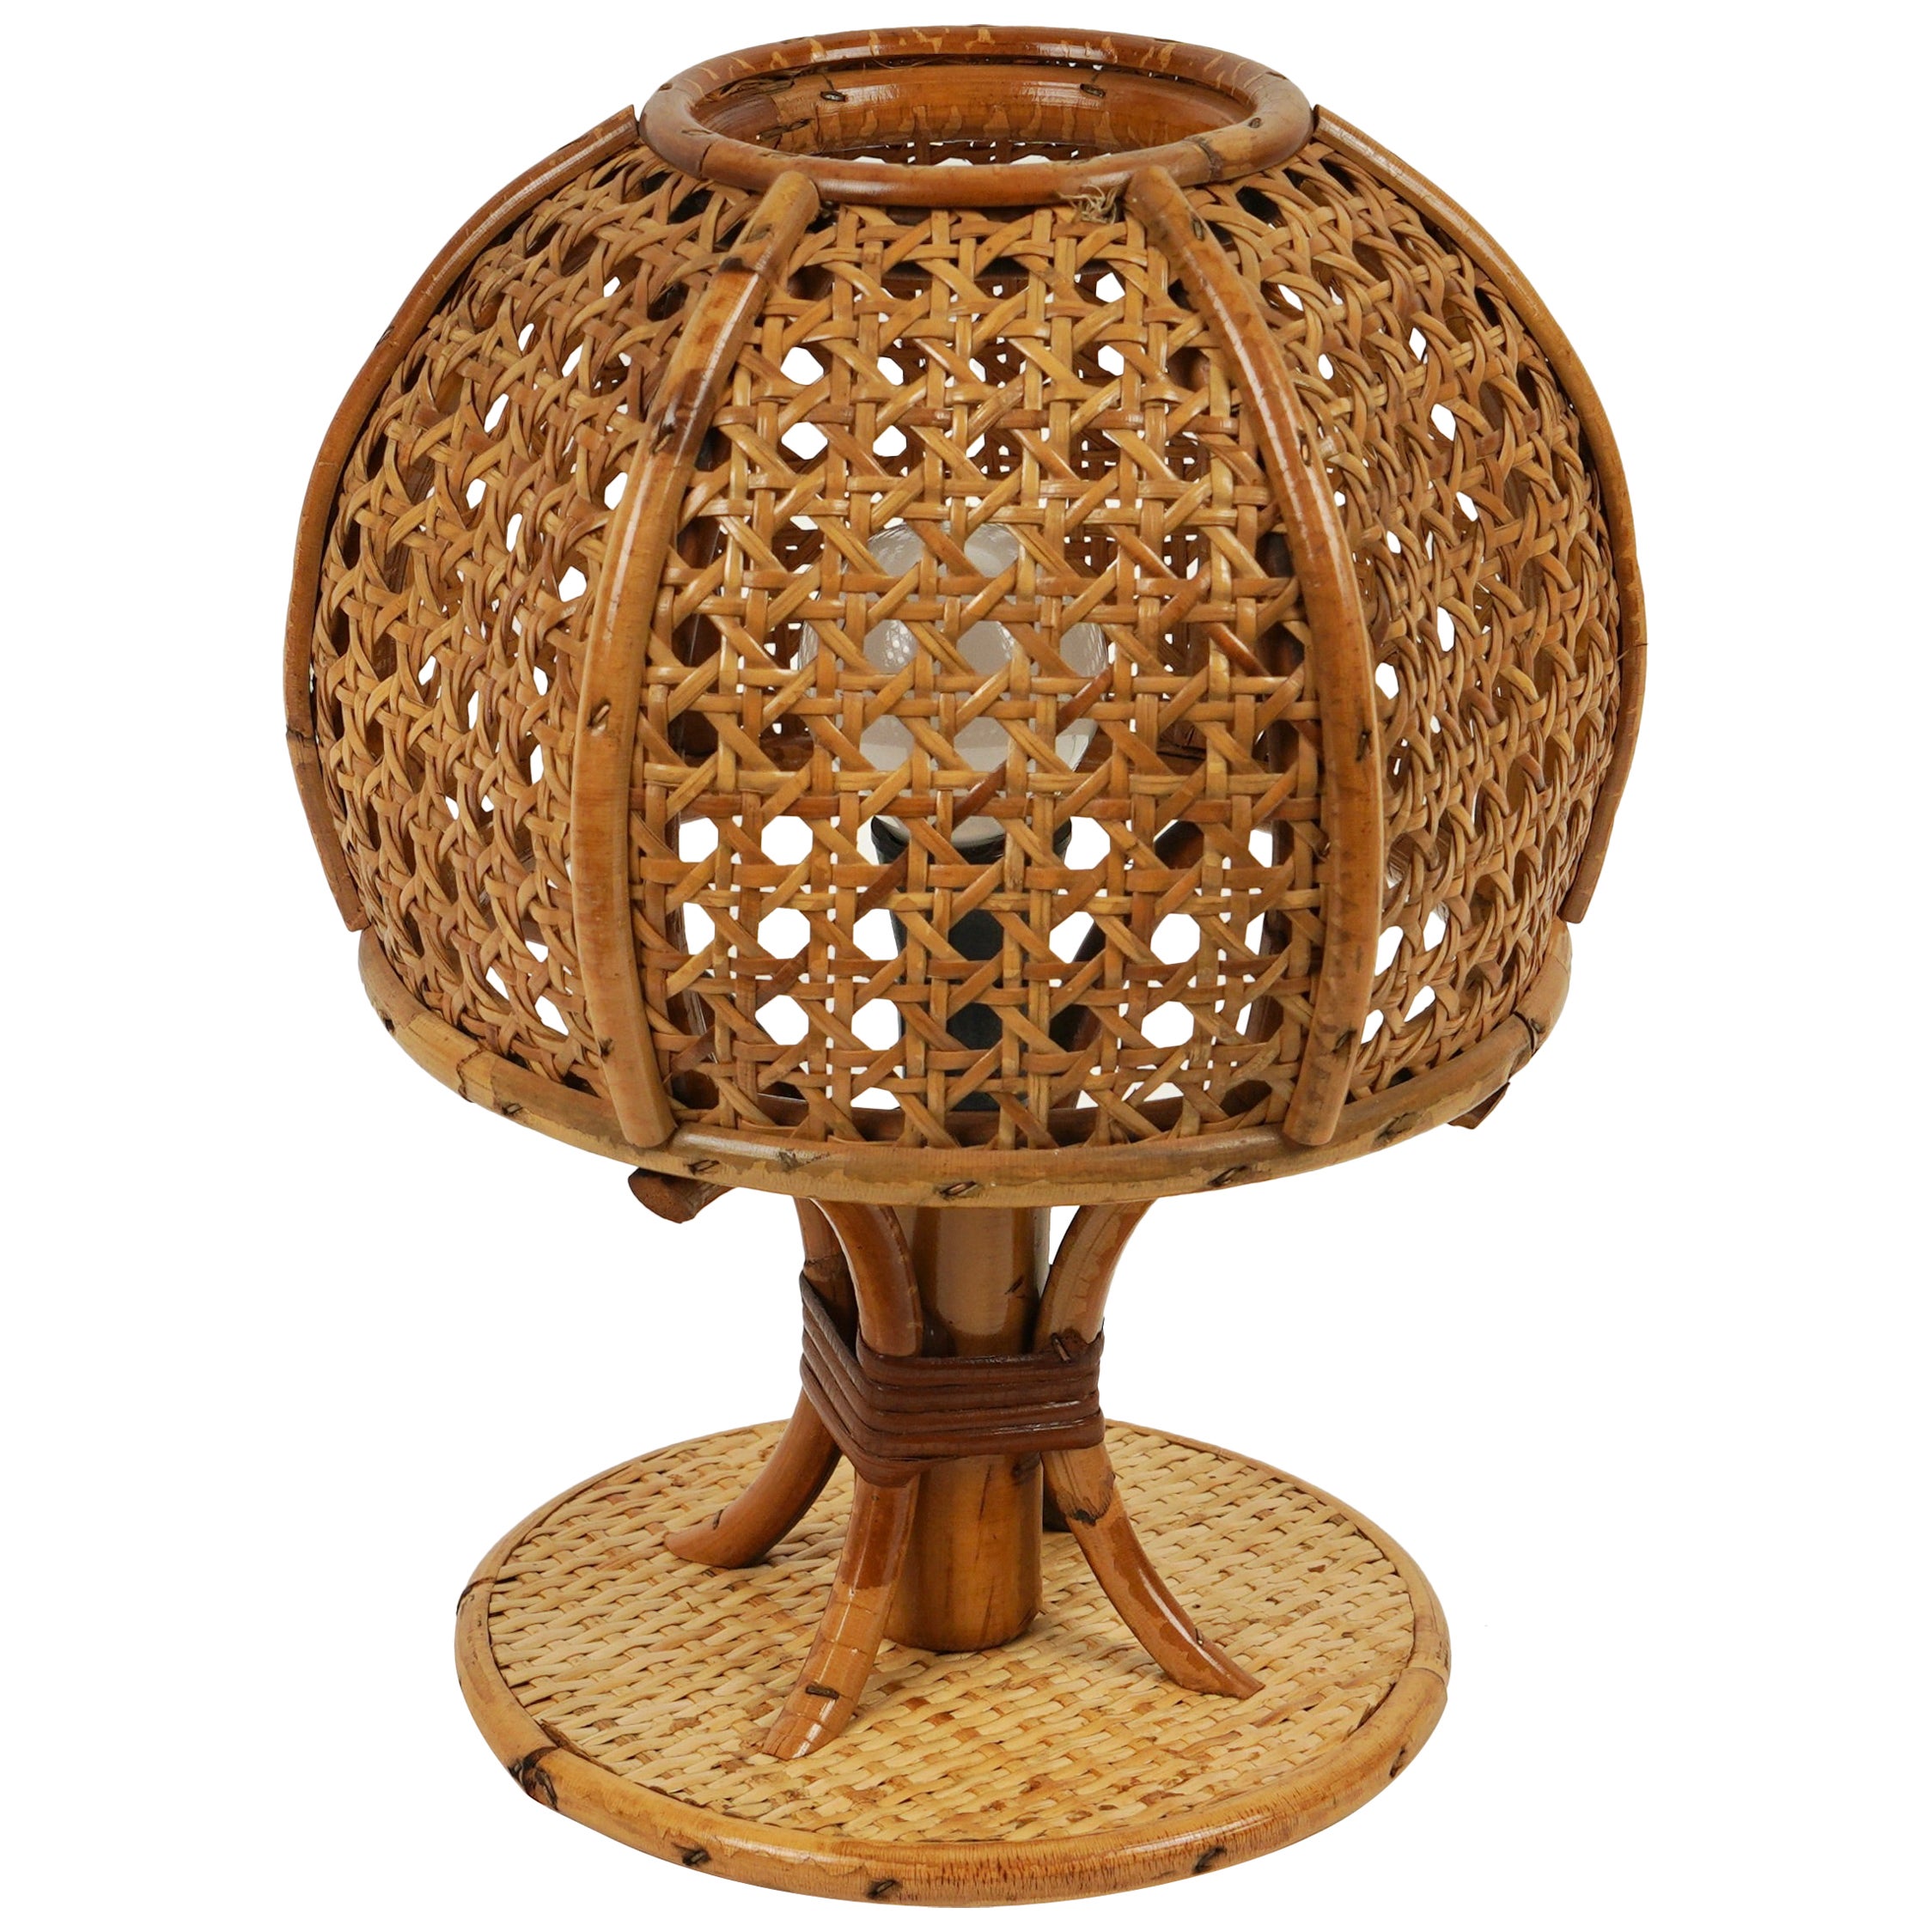 Midcentury Rattan and Wicker Table Lamp Louis Sognot Style, Italy, circa 1970s For Sale